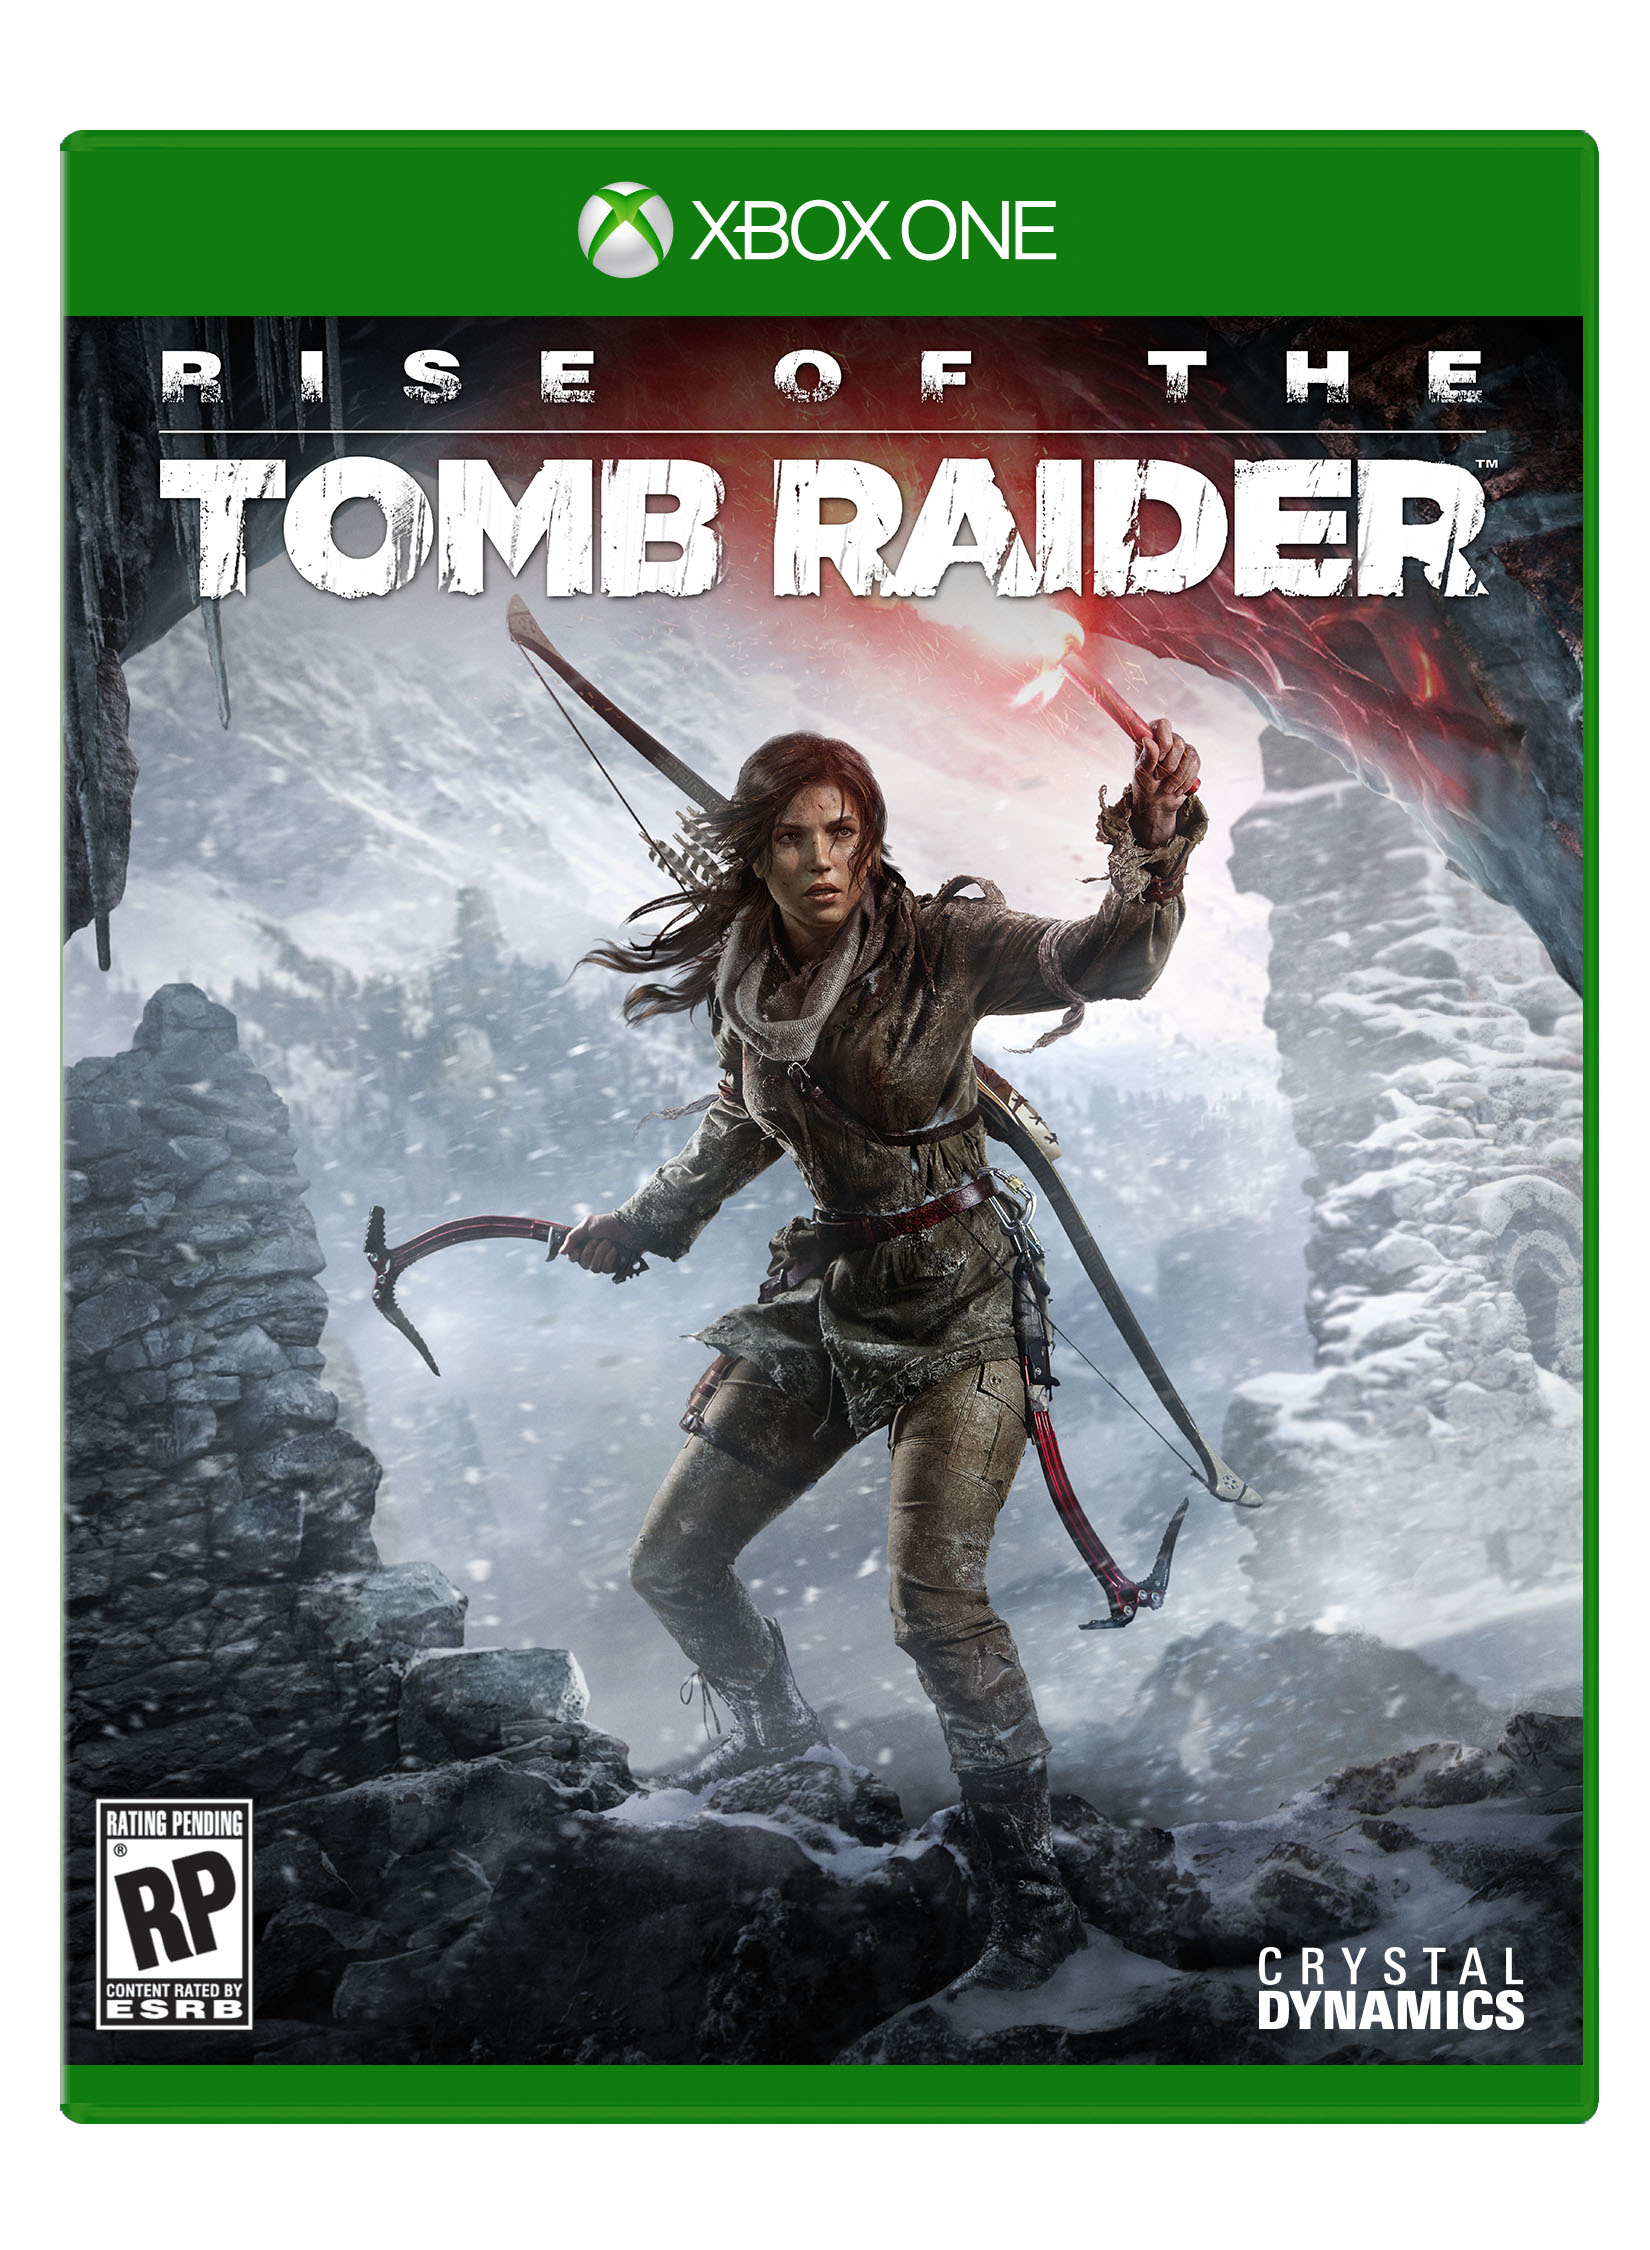 http://ilovevg.it/wp-content/uploads/2015/06/Rise-of-the-Tomb-Raider_2015_06-01-15_001.jpg